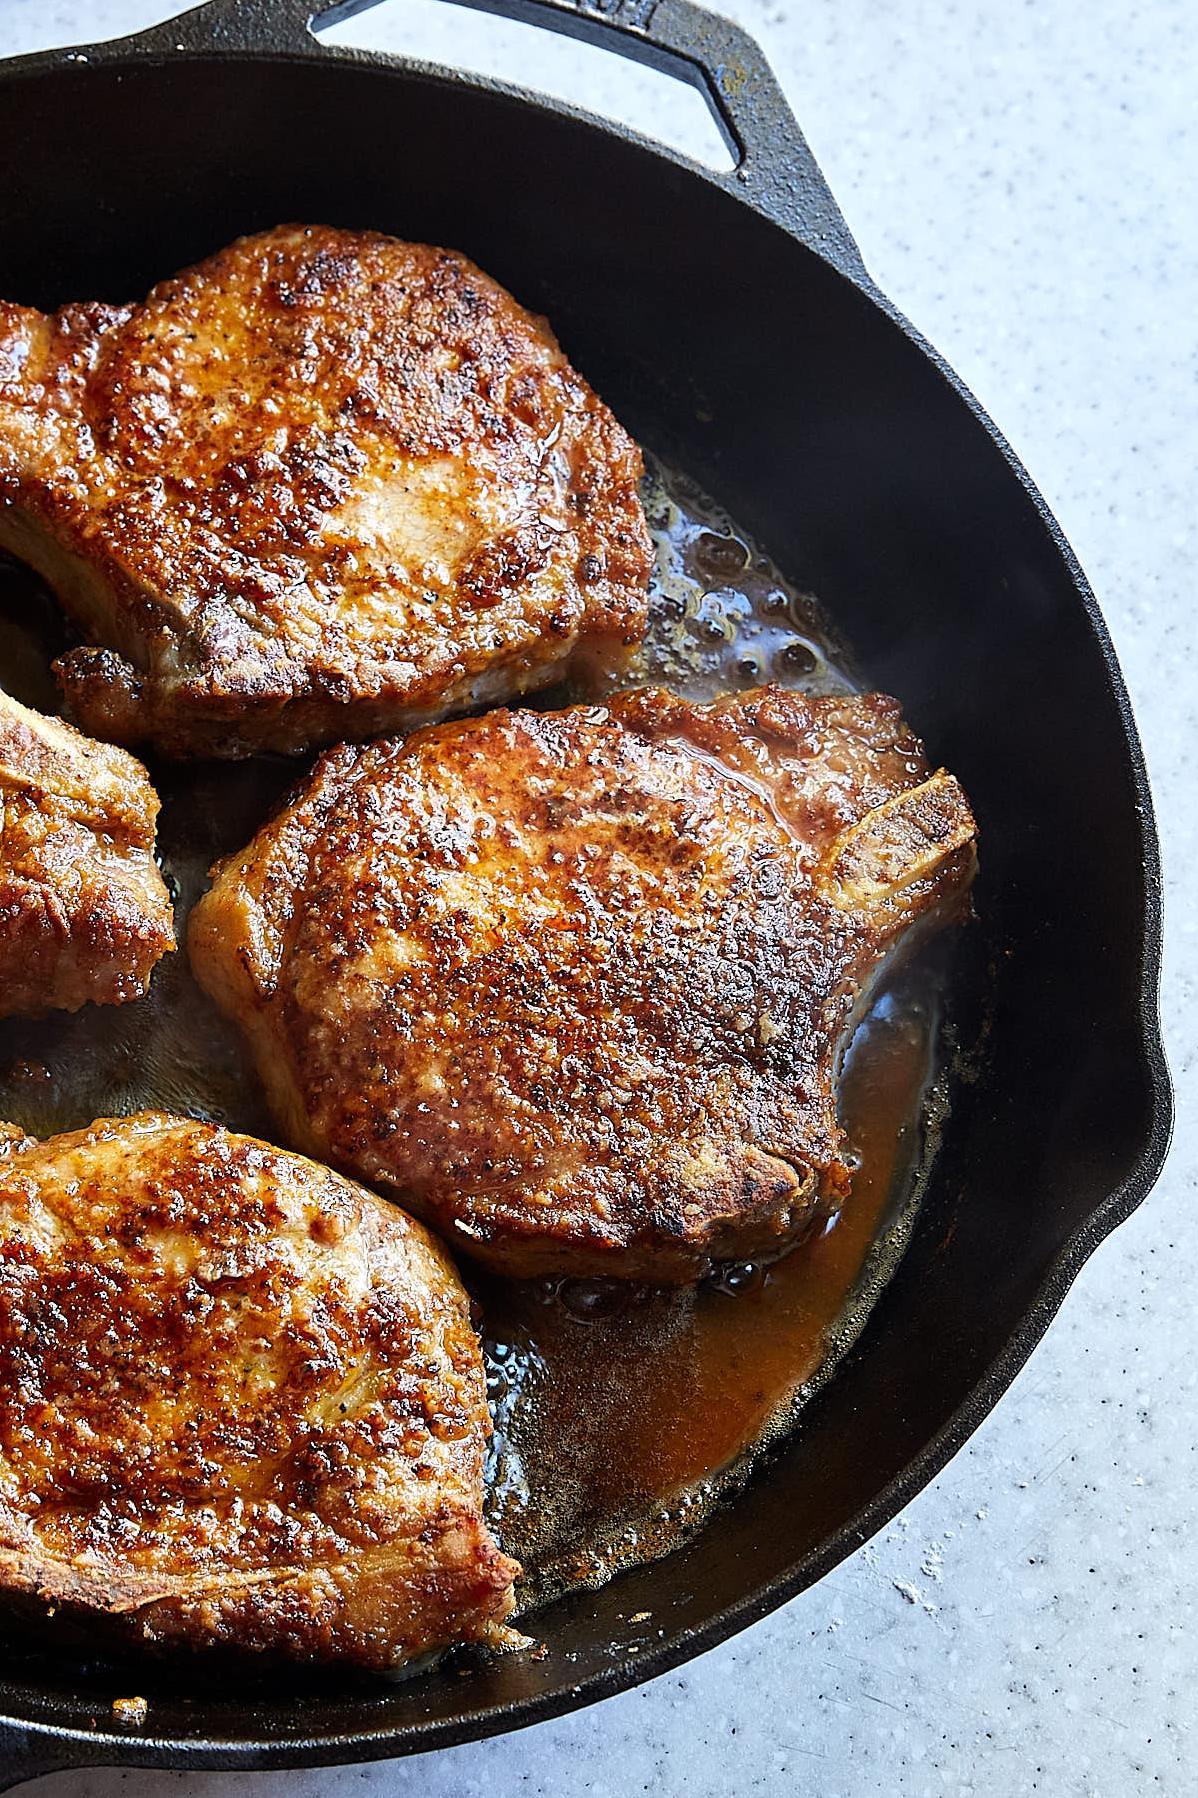  The juicy and flavorful pork chops will be the star of your dinner table.